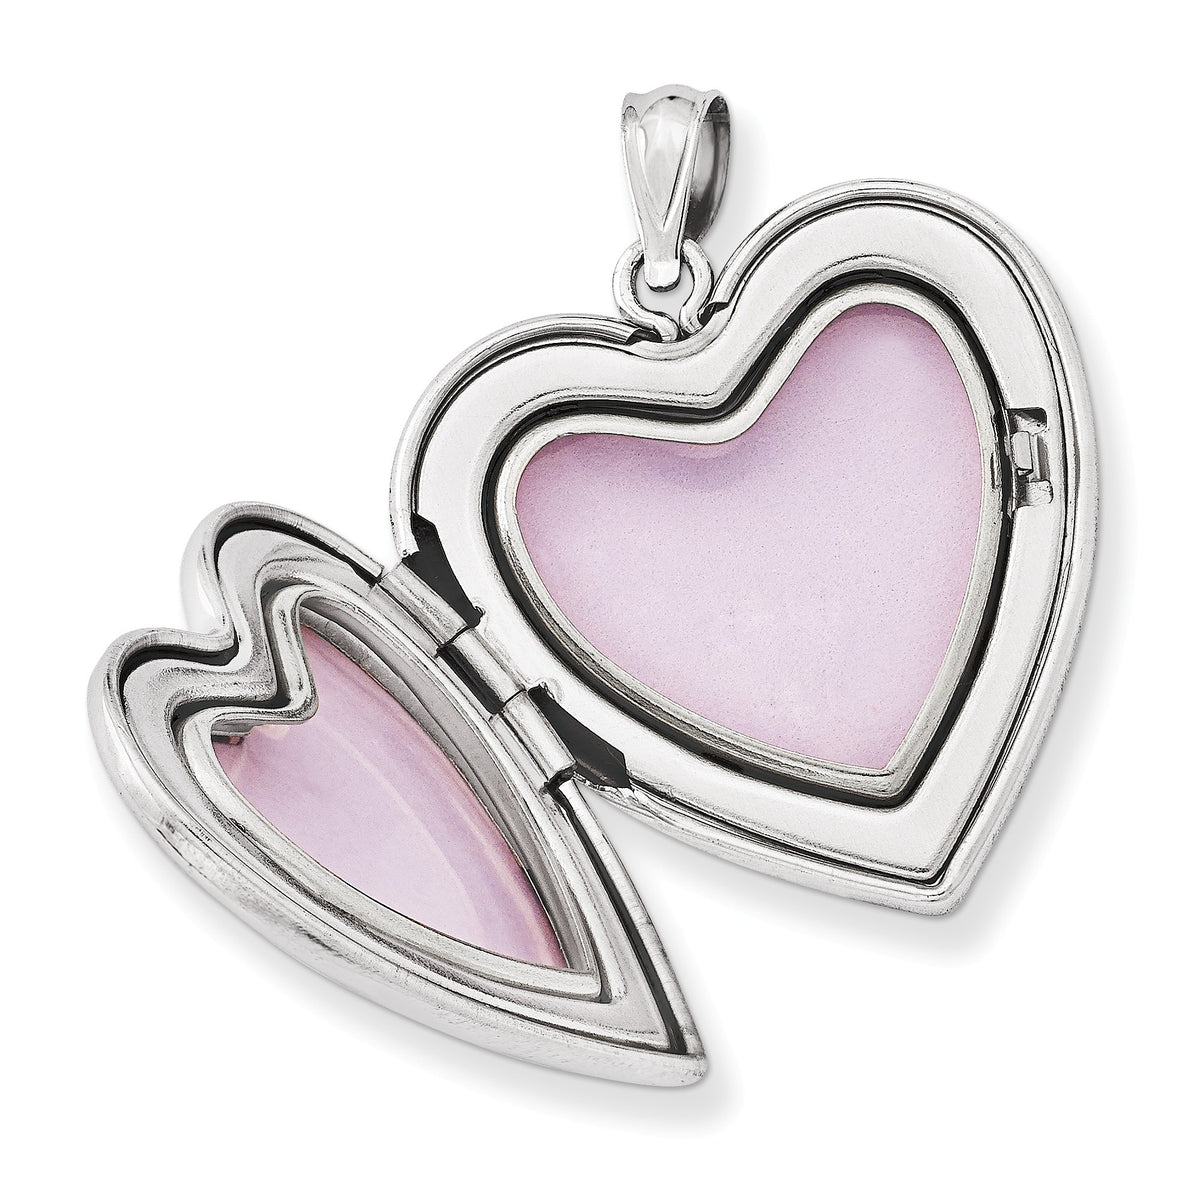 Alternate view of the Sterling Silver and Enamel 24mm I Love You Rose Heart Locket by The Black Bow Jewelry Co.